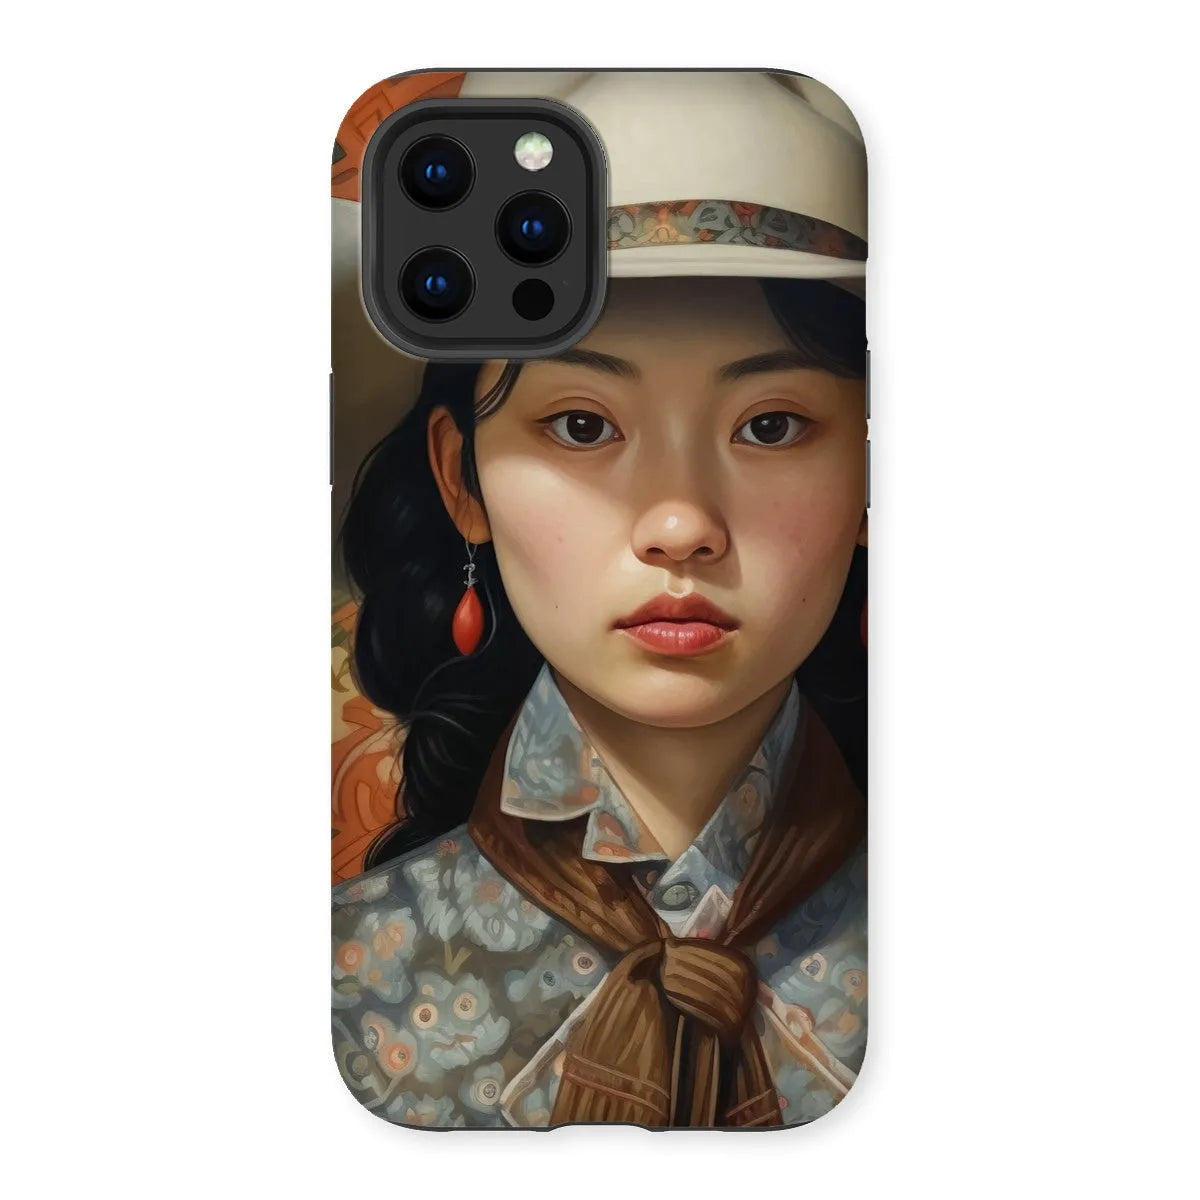 Zhi The Lesbian Cowgirl - Sapphic Art Phone Case - Iphone 12 Pro Max / Matte - Mobile Phone Cases - Aesthetic Art